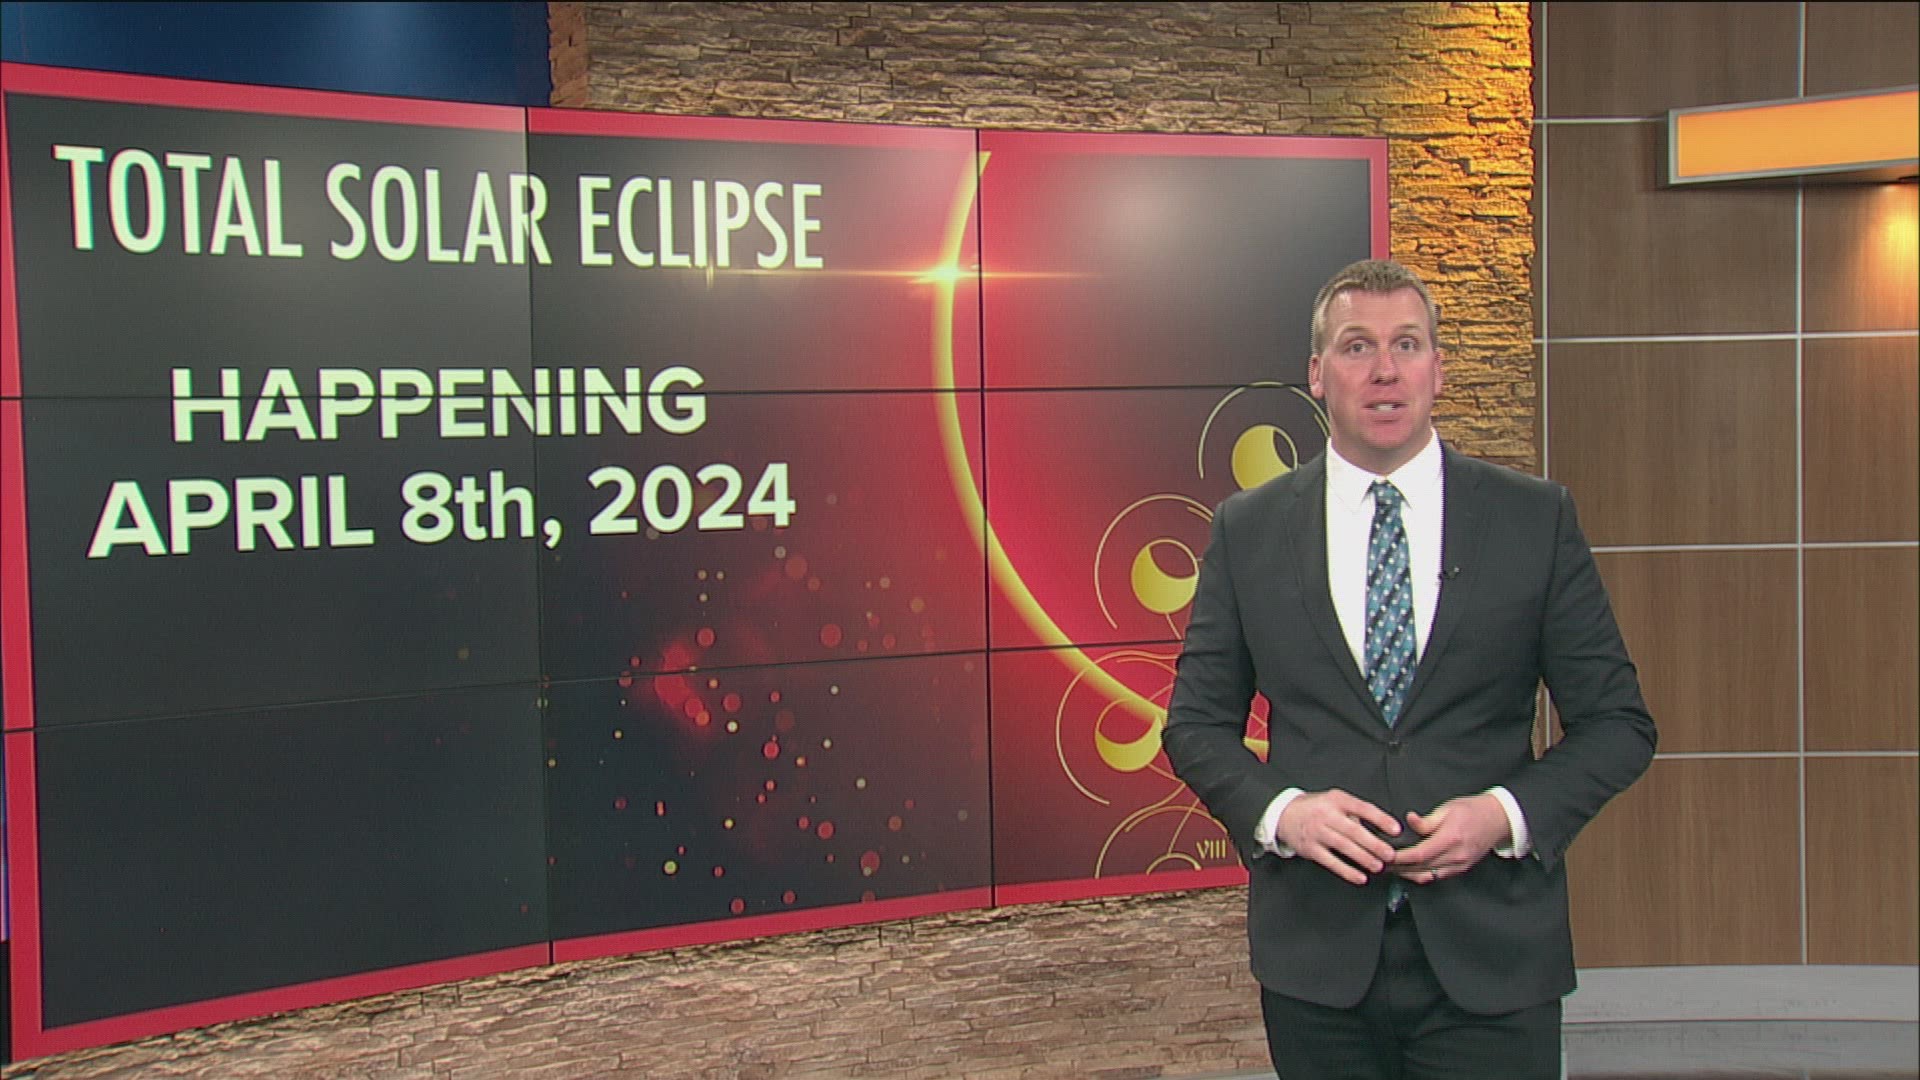 WTOL 11 Meteorologist Ryan Wichman breaks down who will be under totality for the most amount of time during the 2024 total solar eclipse.